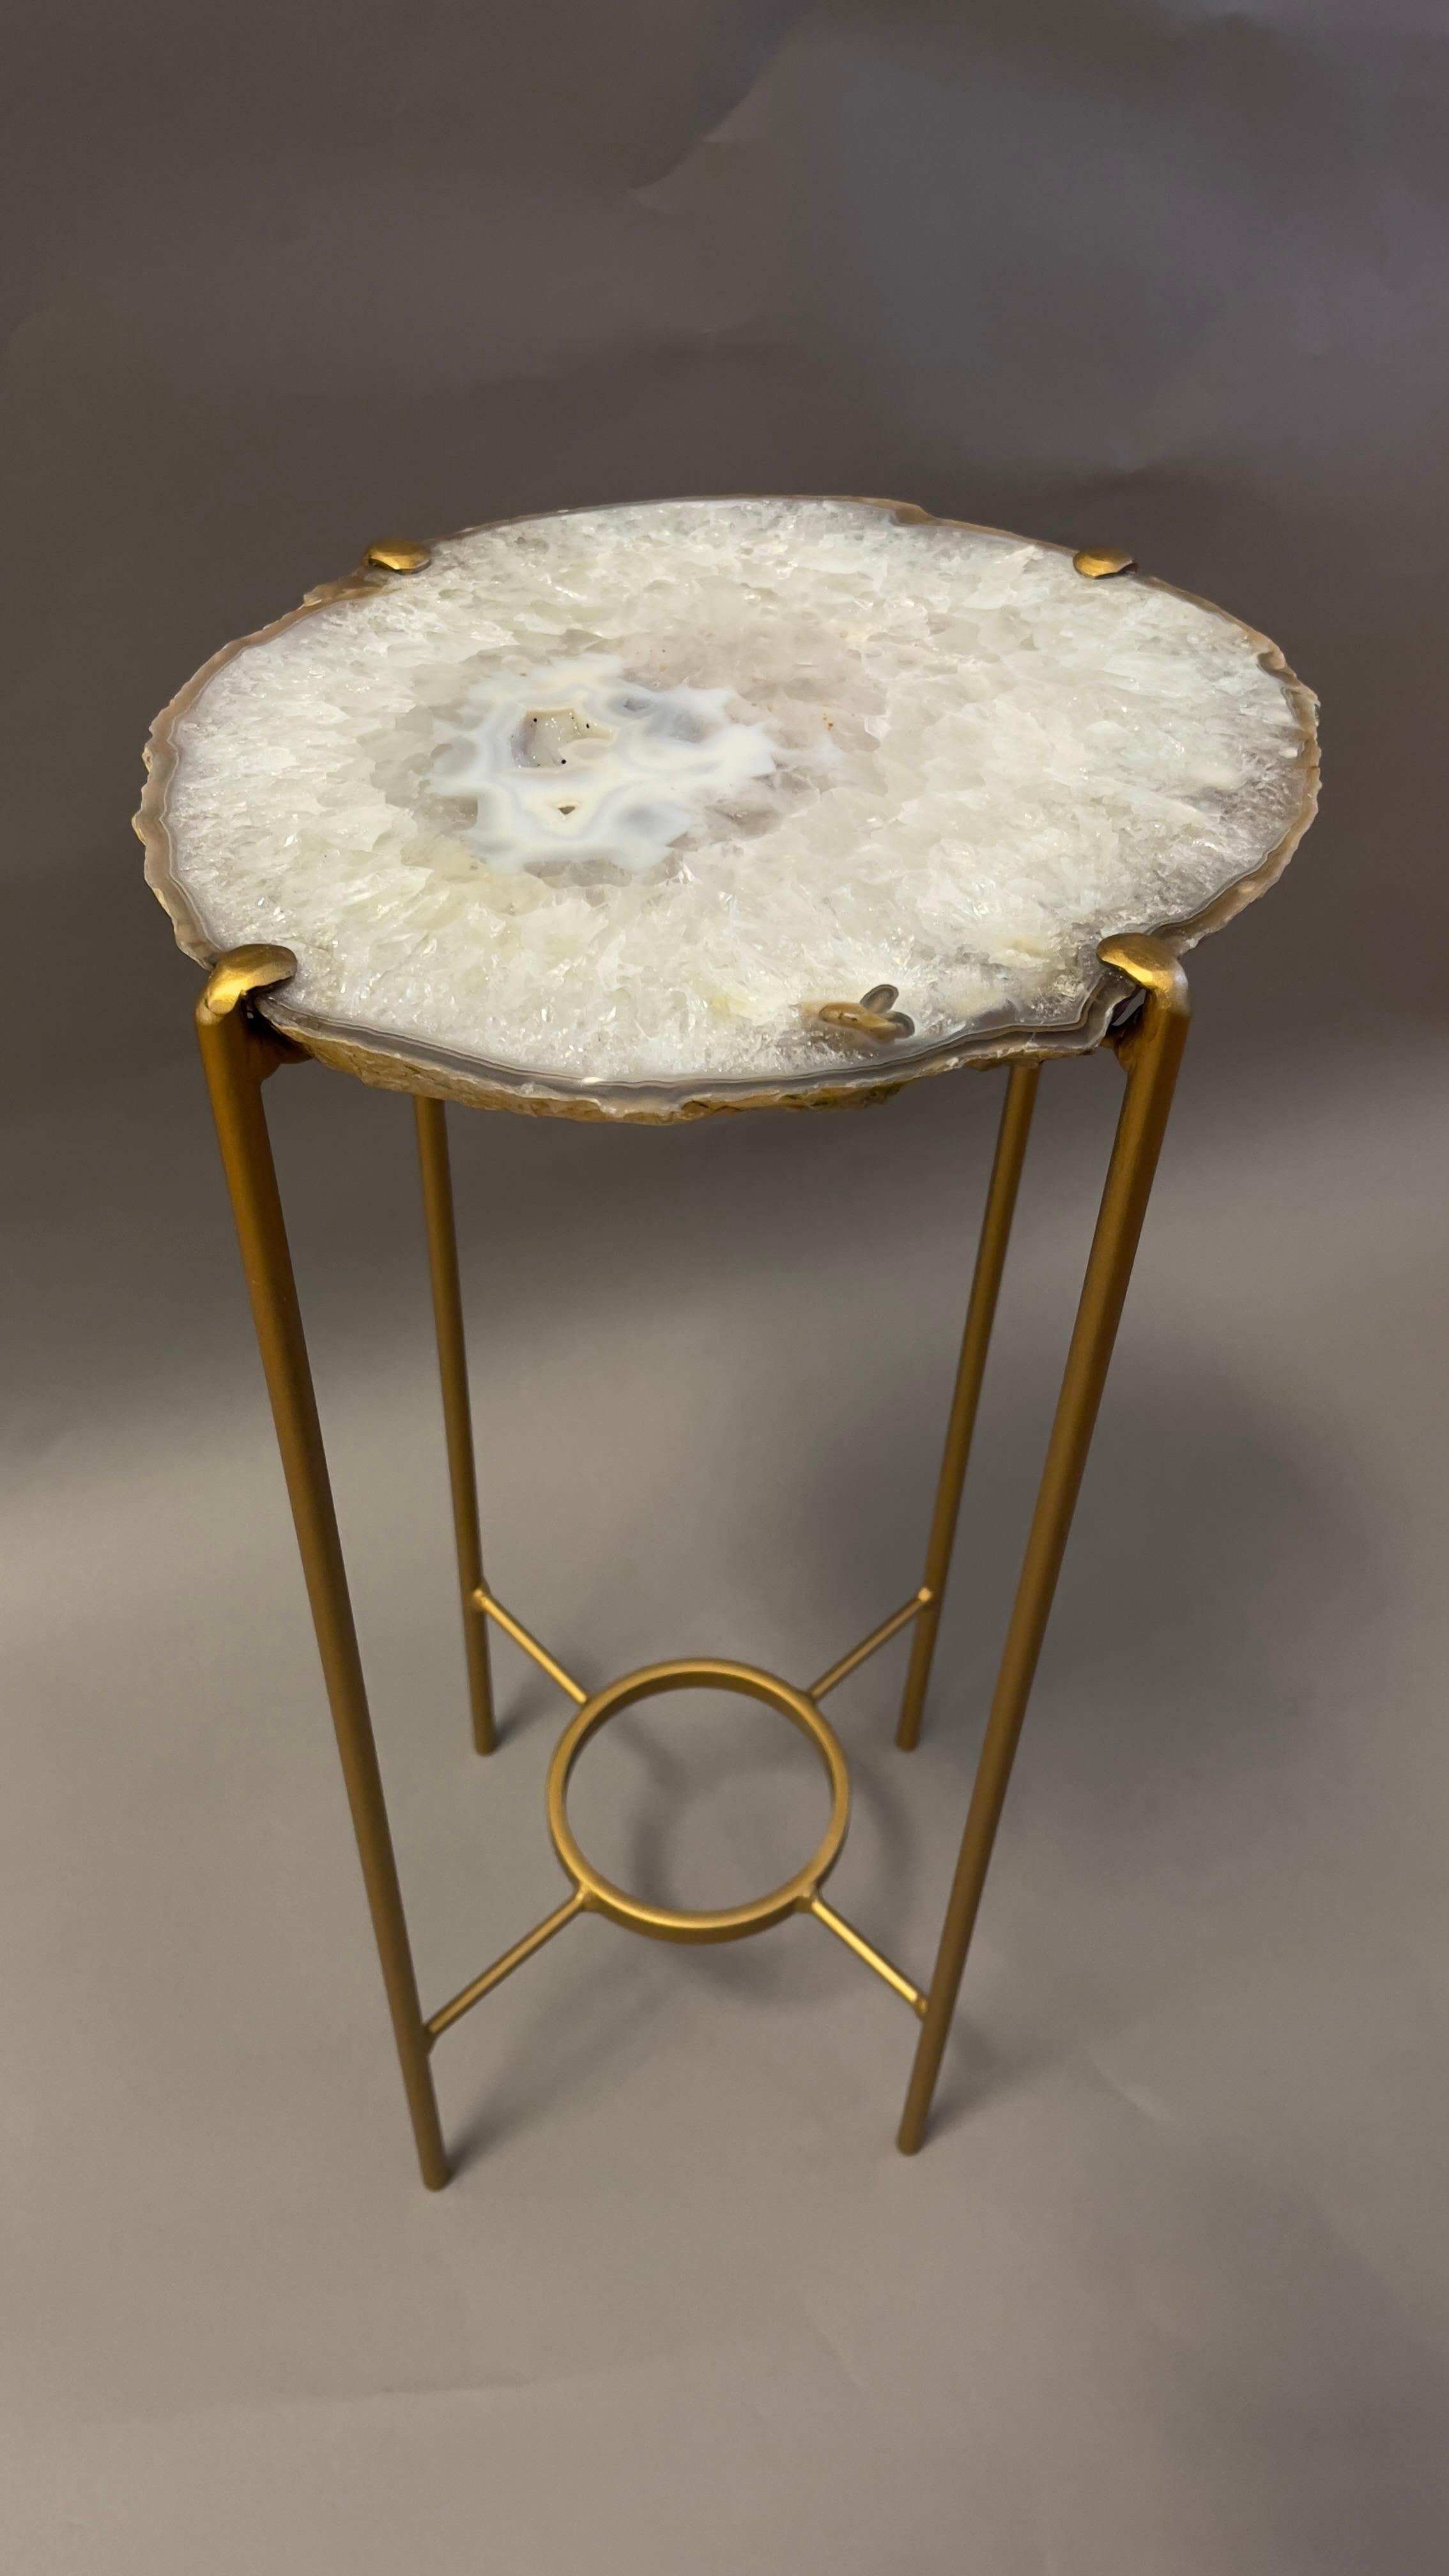 Our gorgeous geode tables are a perfect addition to any room, particularly when the light catches them just right. Each Agate surface unique in color, points of interest and shape.

Handcrafted with polished quartzite slabs atop a gilt metal base.